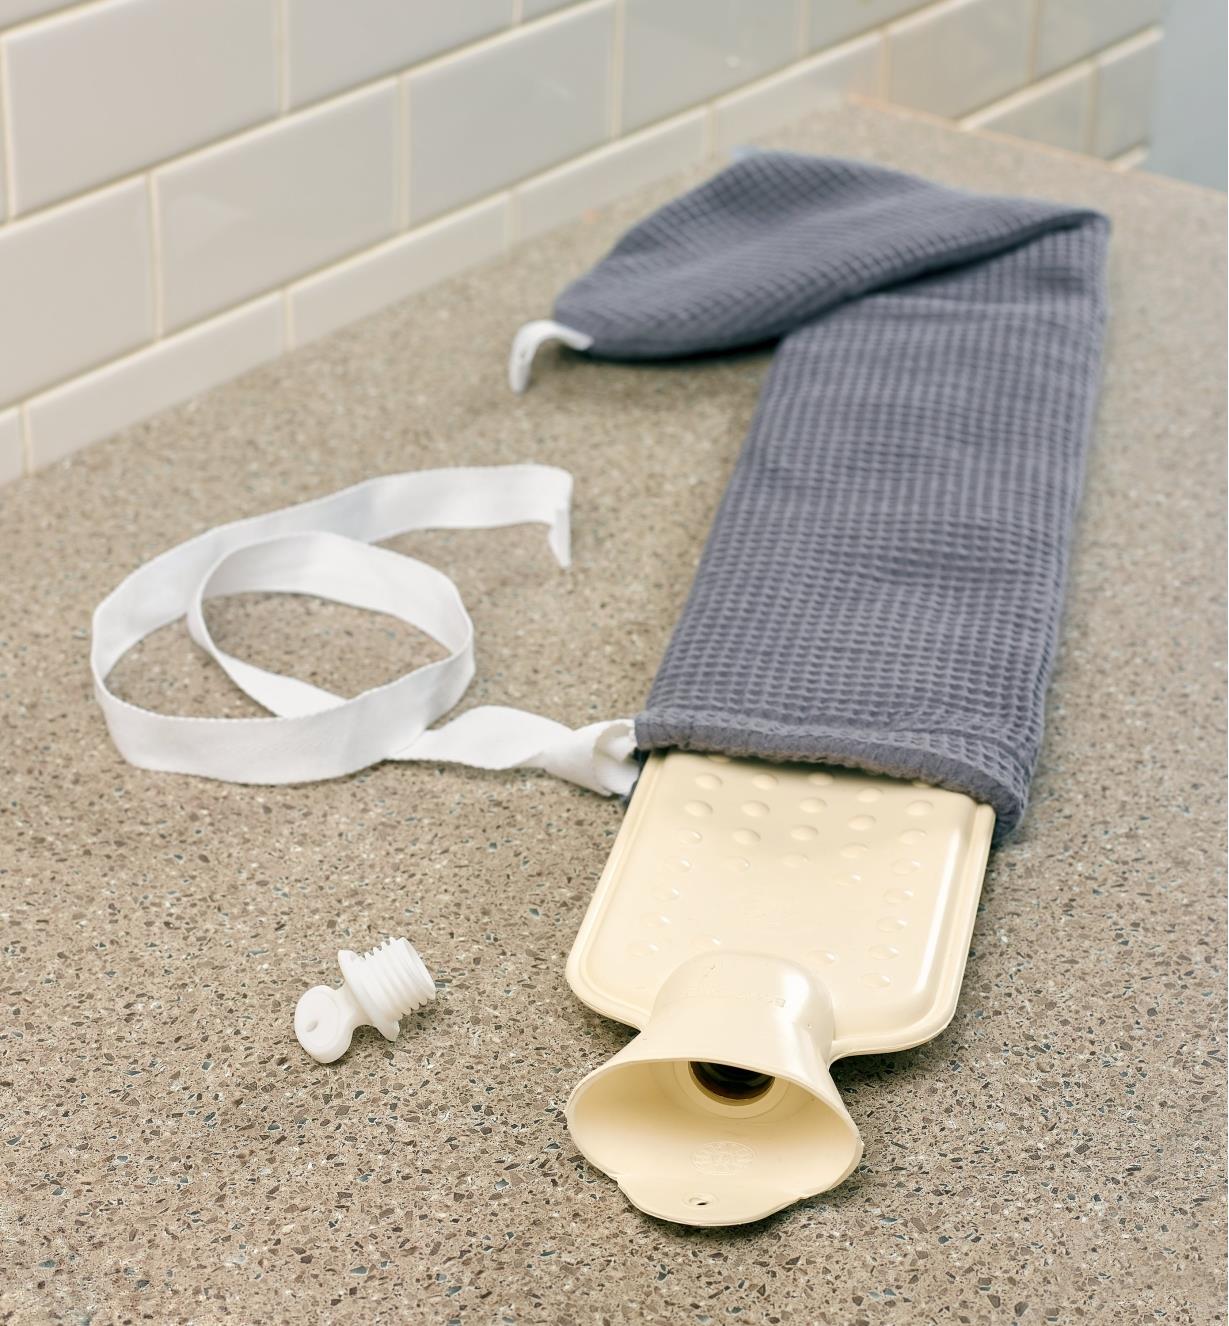 An empty long hot-water bottle sits on a counter, the cover partially removed, ready to fill